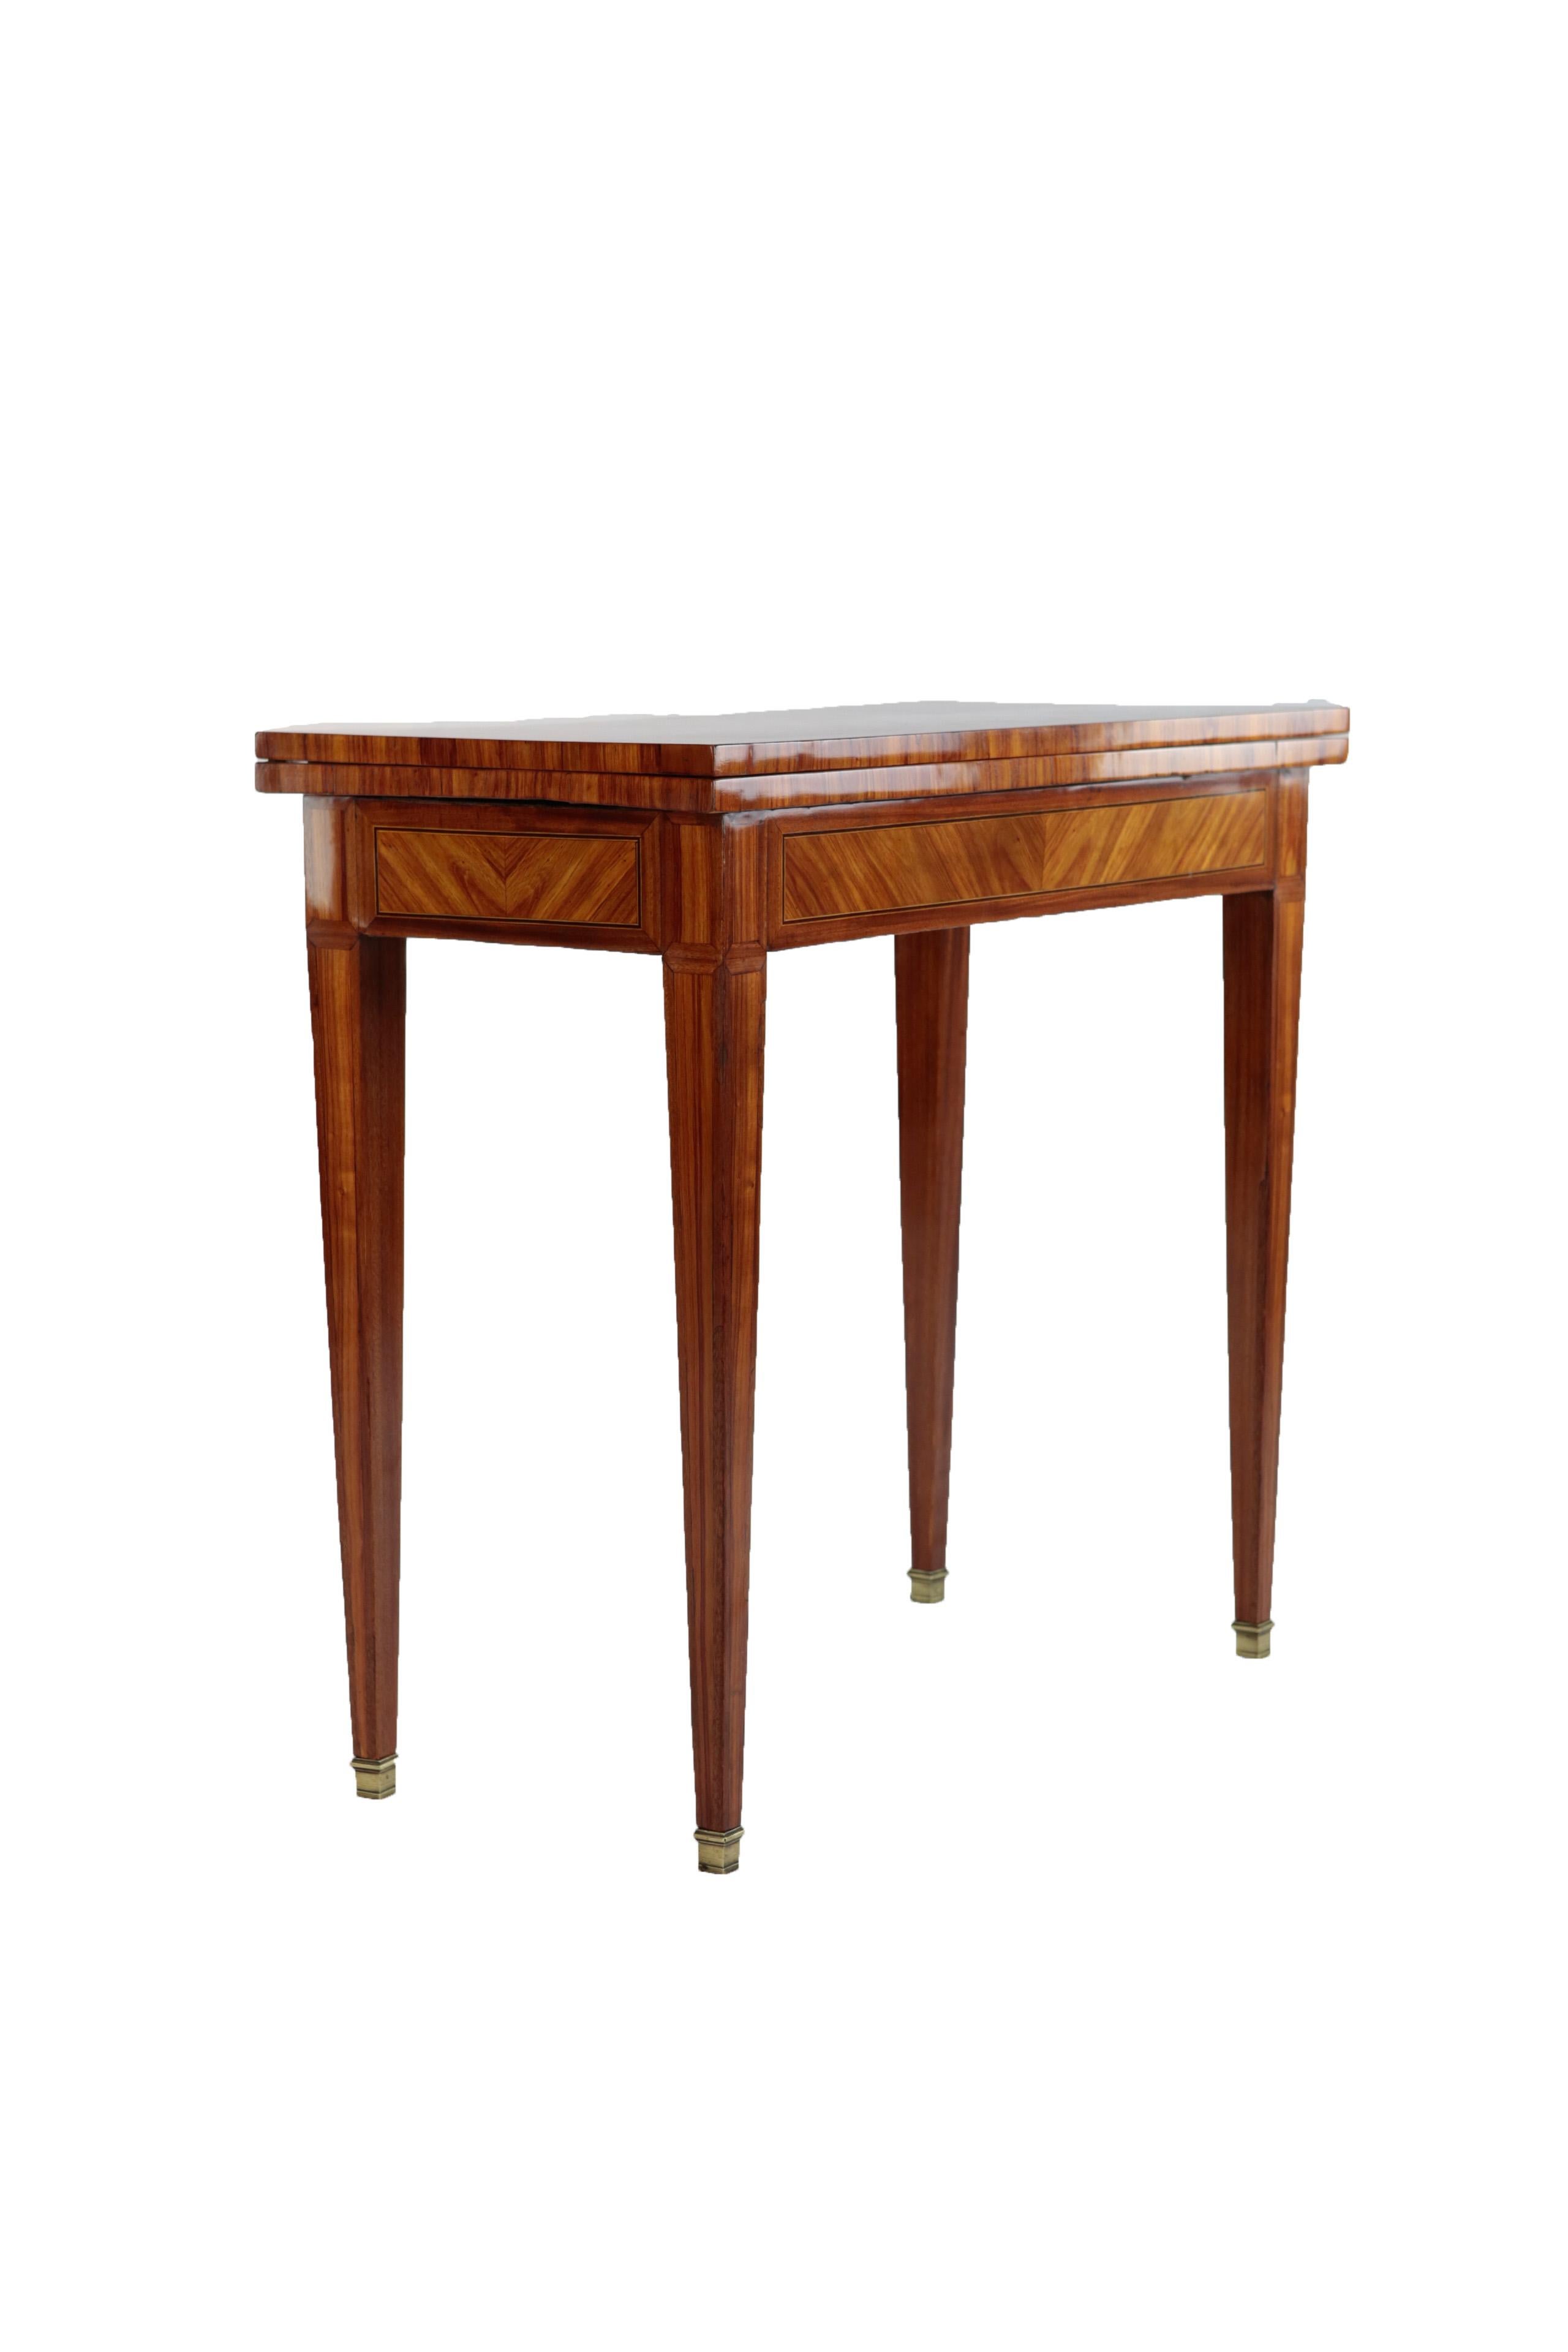 Foldable Game Table, France, Rosewood, circa 1850-1860 1